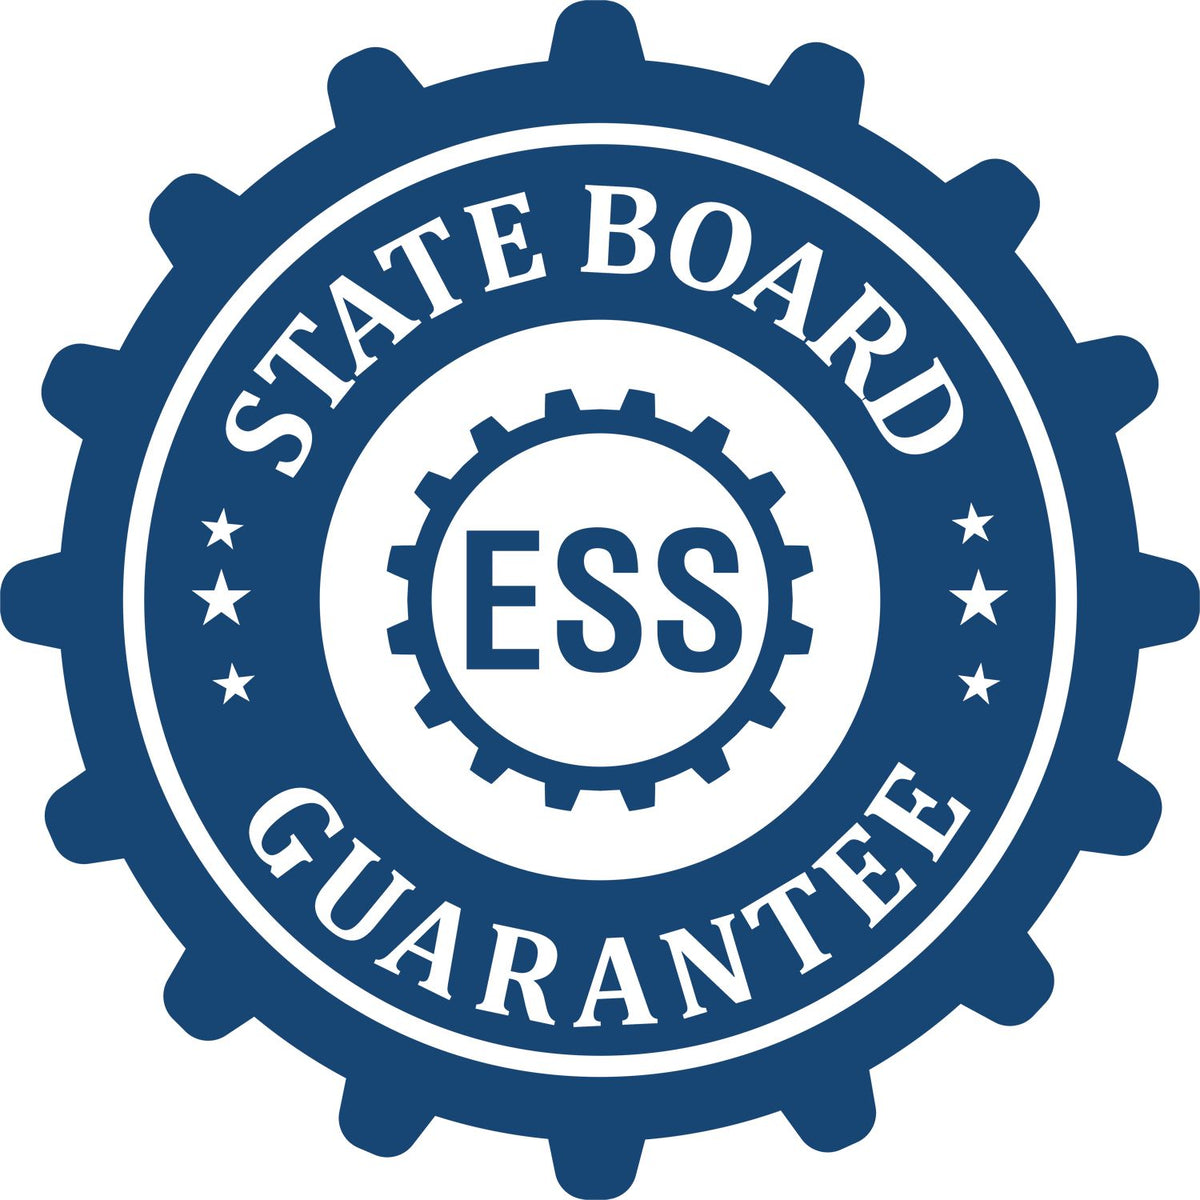 An emblem in a gear shape illustrating a state board guarantee for the Digital Oklahoma PE Stamp and Electronic Seal for Oklahoma Engineer product.